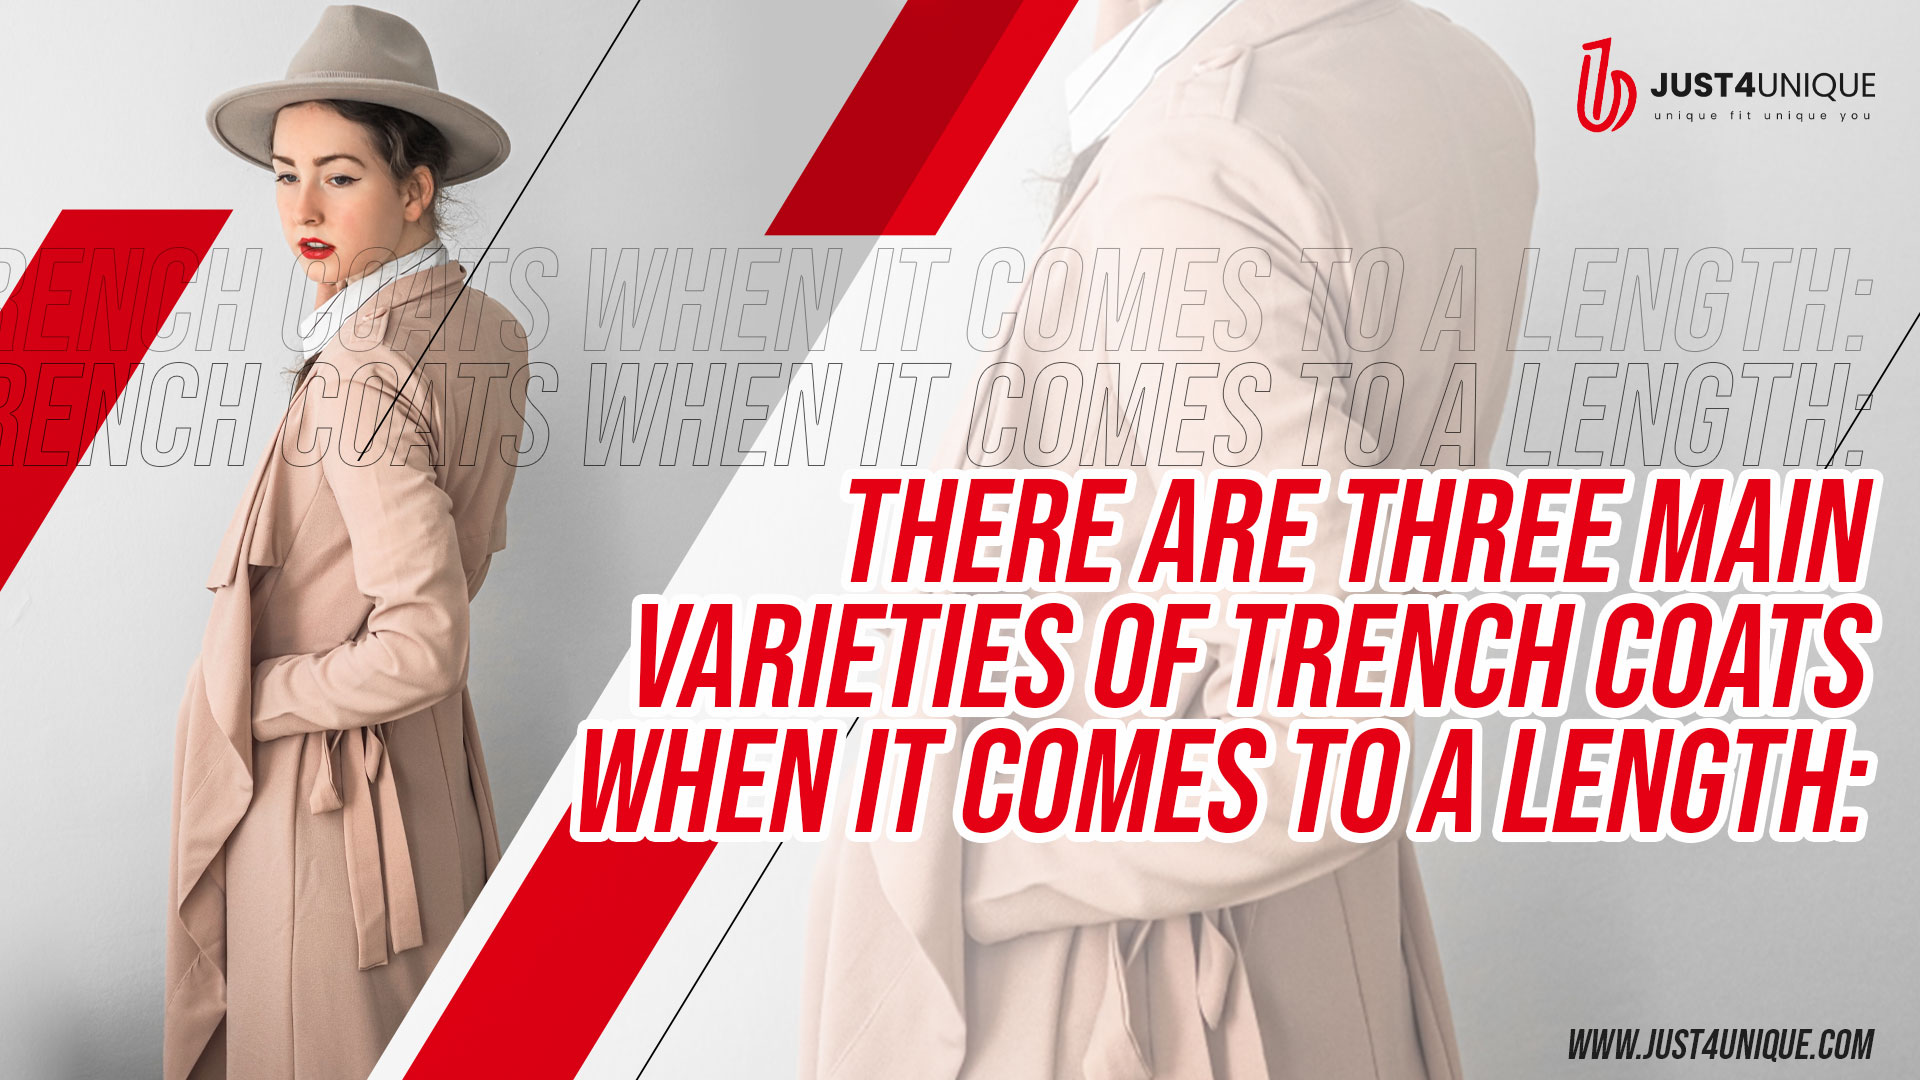 There are three main varieties of trench coats